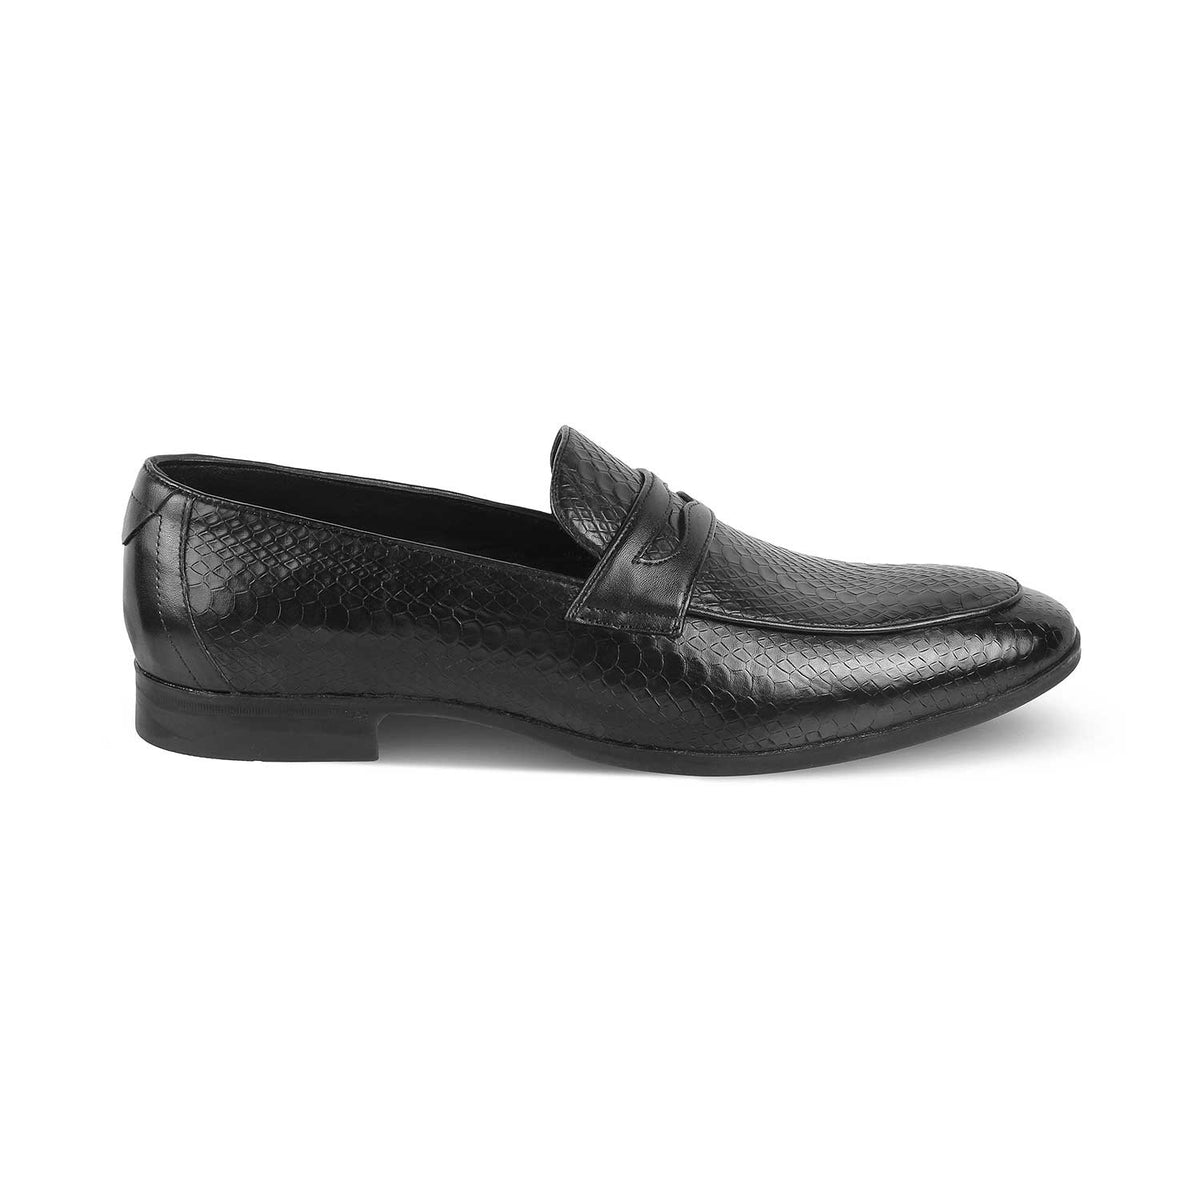 The Rosnake Black Men's Leather Loafers Tresmode - Tresmode